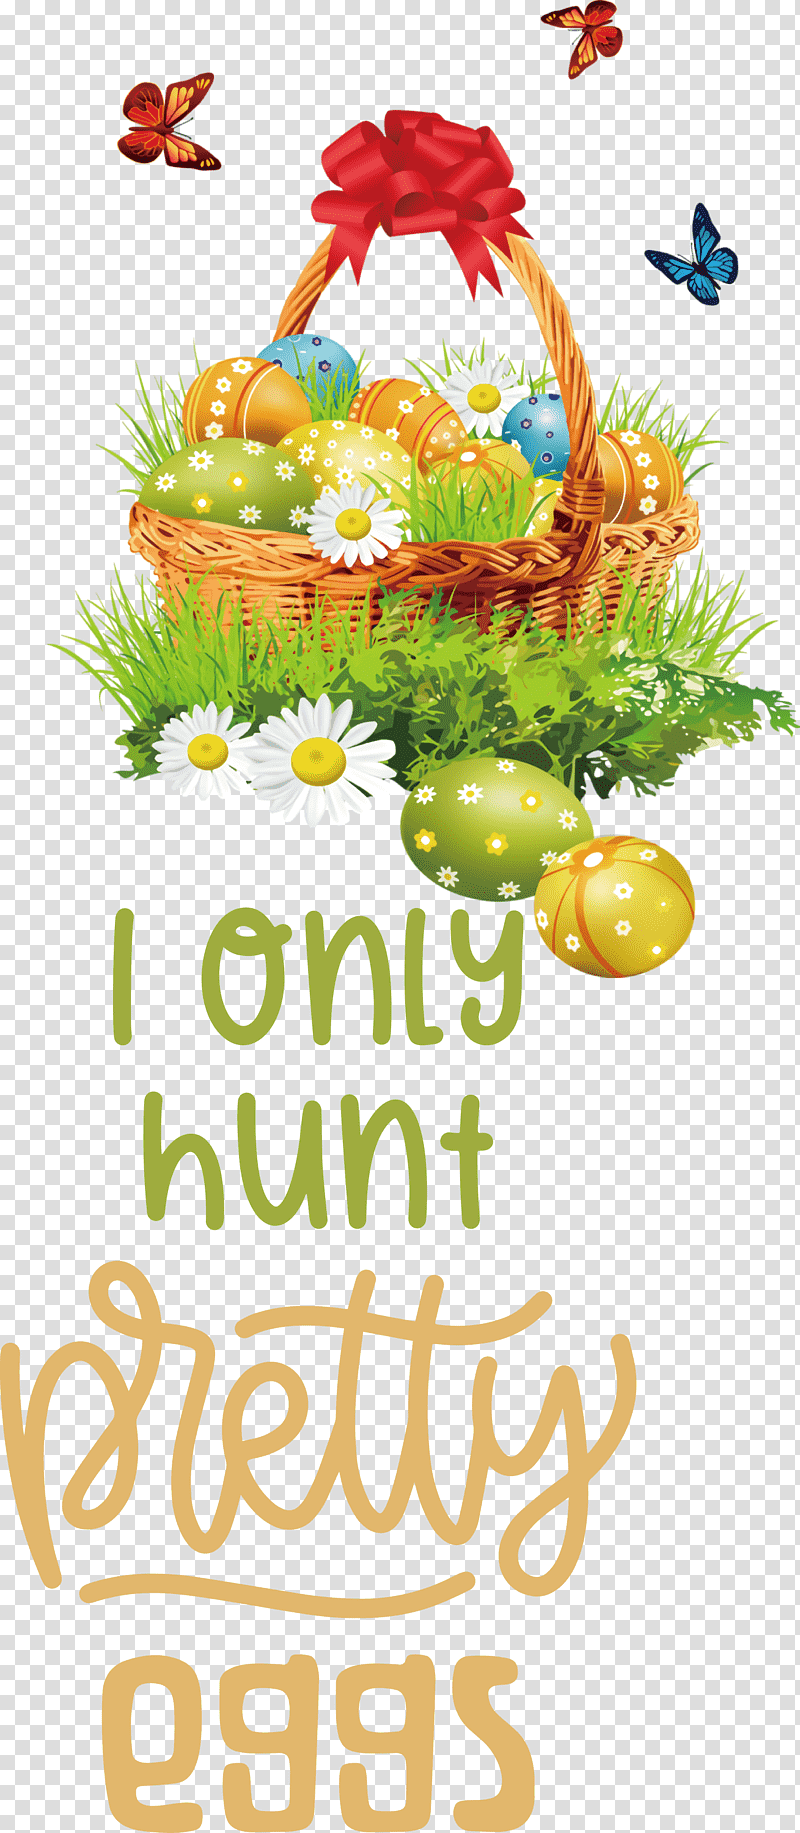 Hunt Pretty Eggs Egg Easter Day, Happy Easter, Easter Bunny, Easter Egg, Easter Basket, Holiday, Egg Hunt transparent background PNG clipart